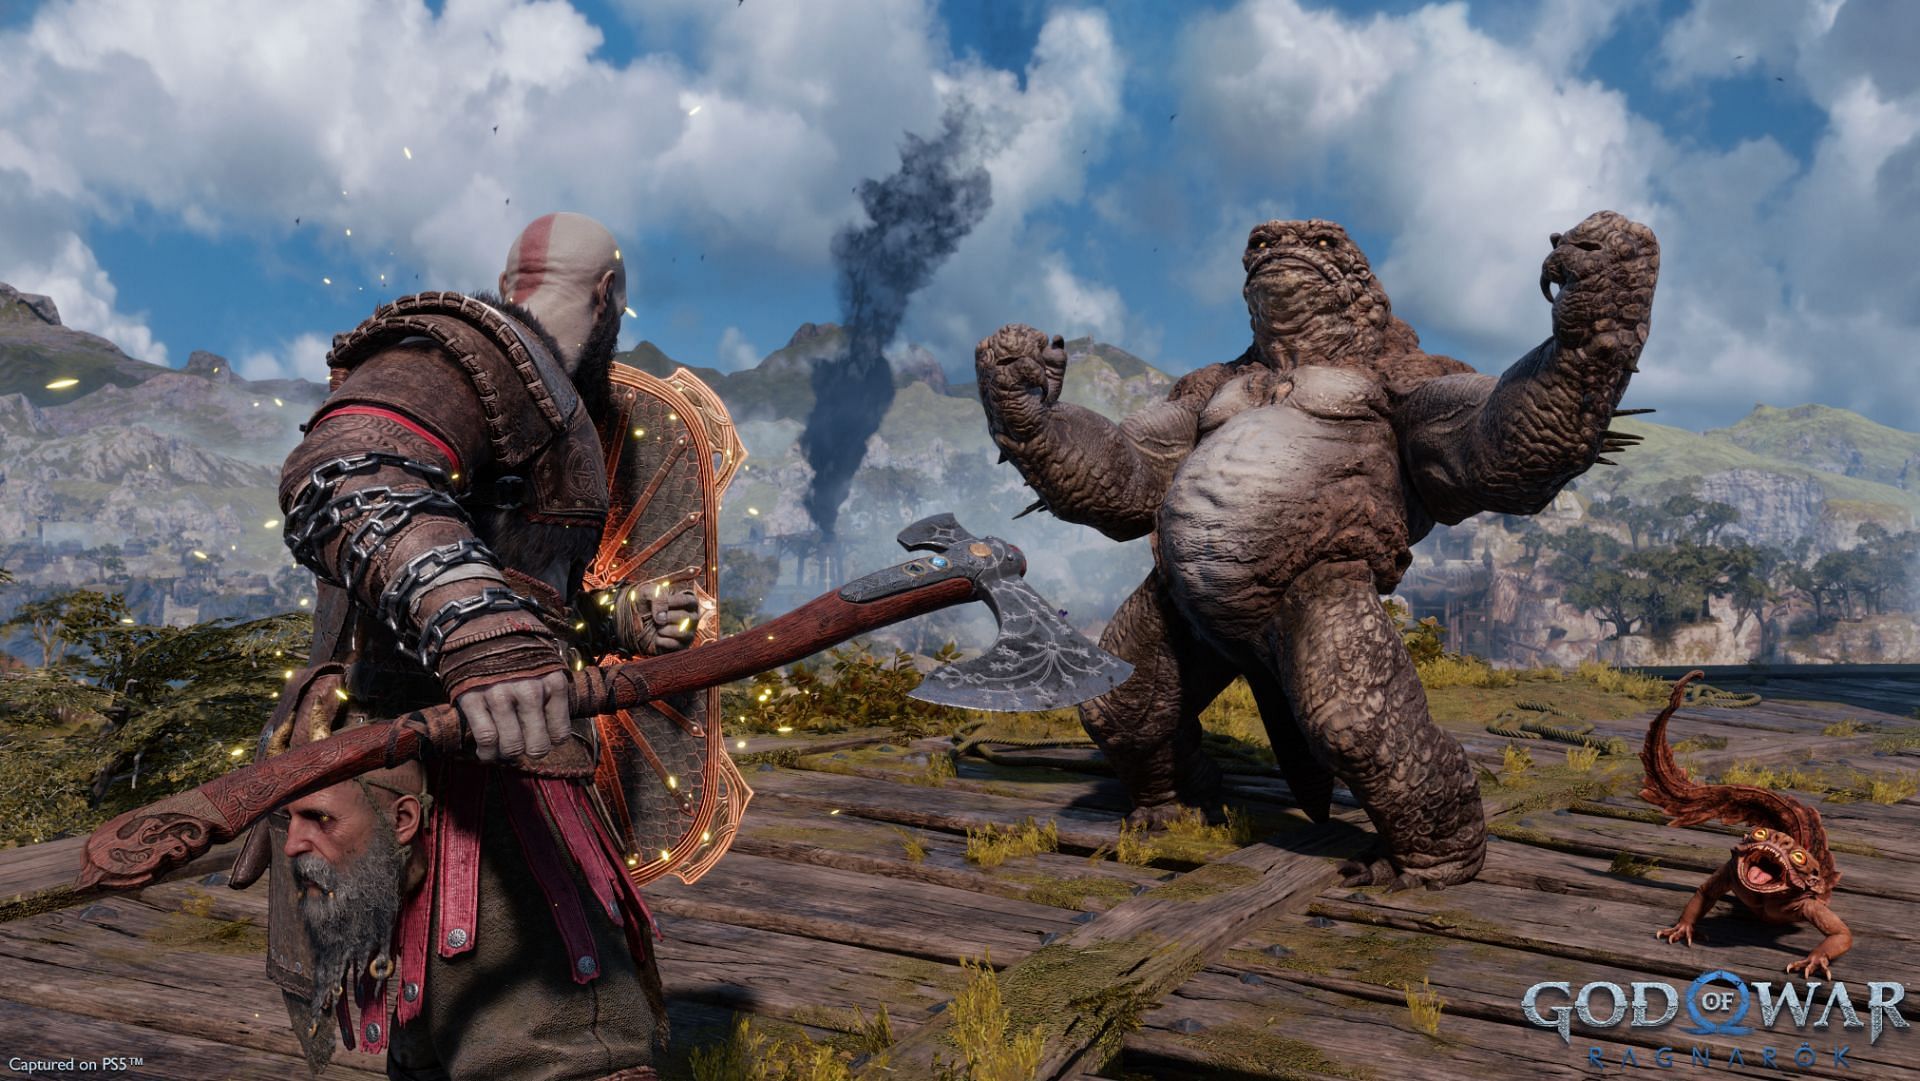 This particular fiend spits up more foes to fight throughout the battle in God of War Ragnarok (Image via Santa Monica Studio)